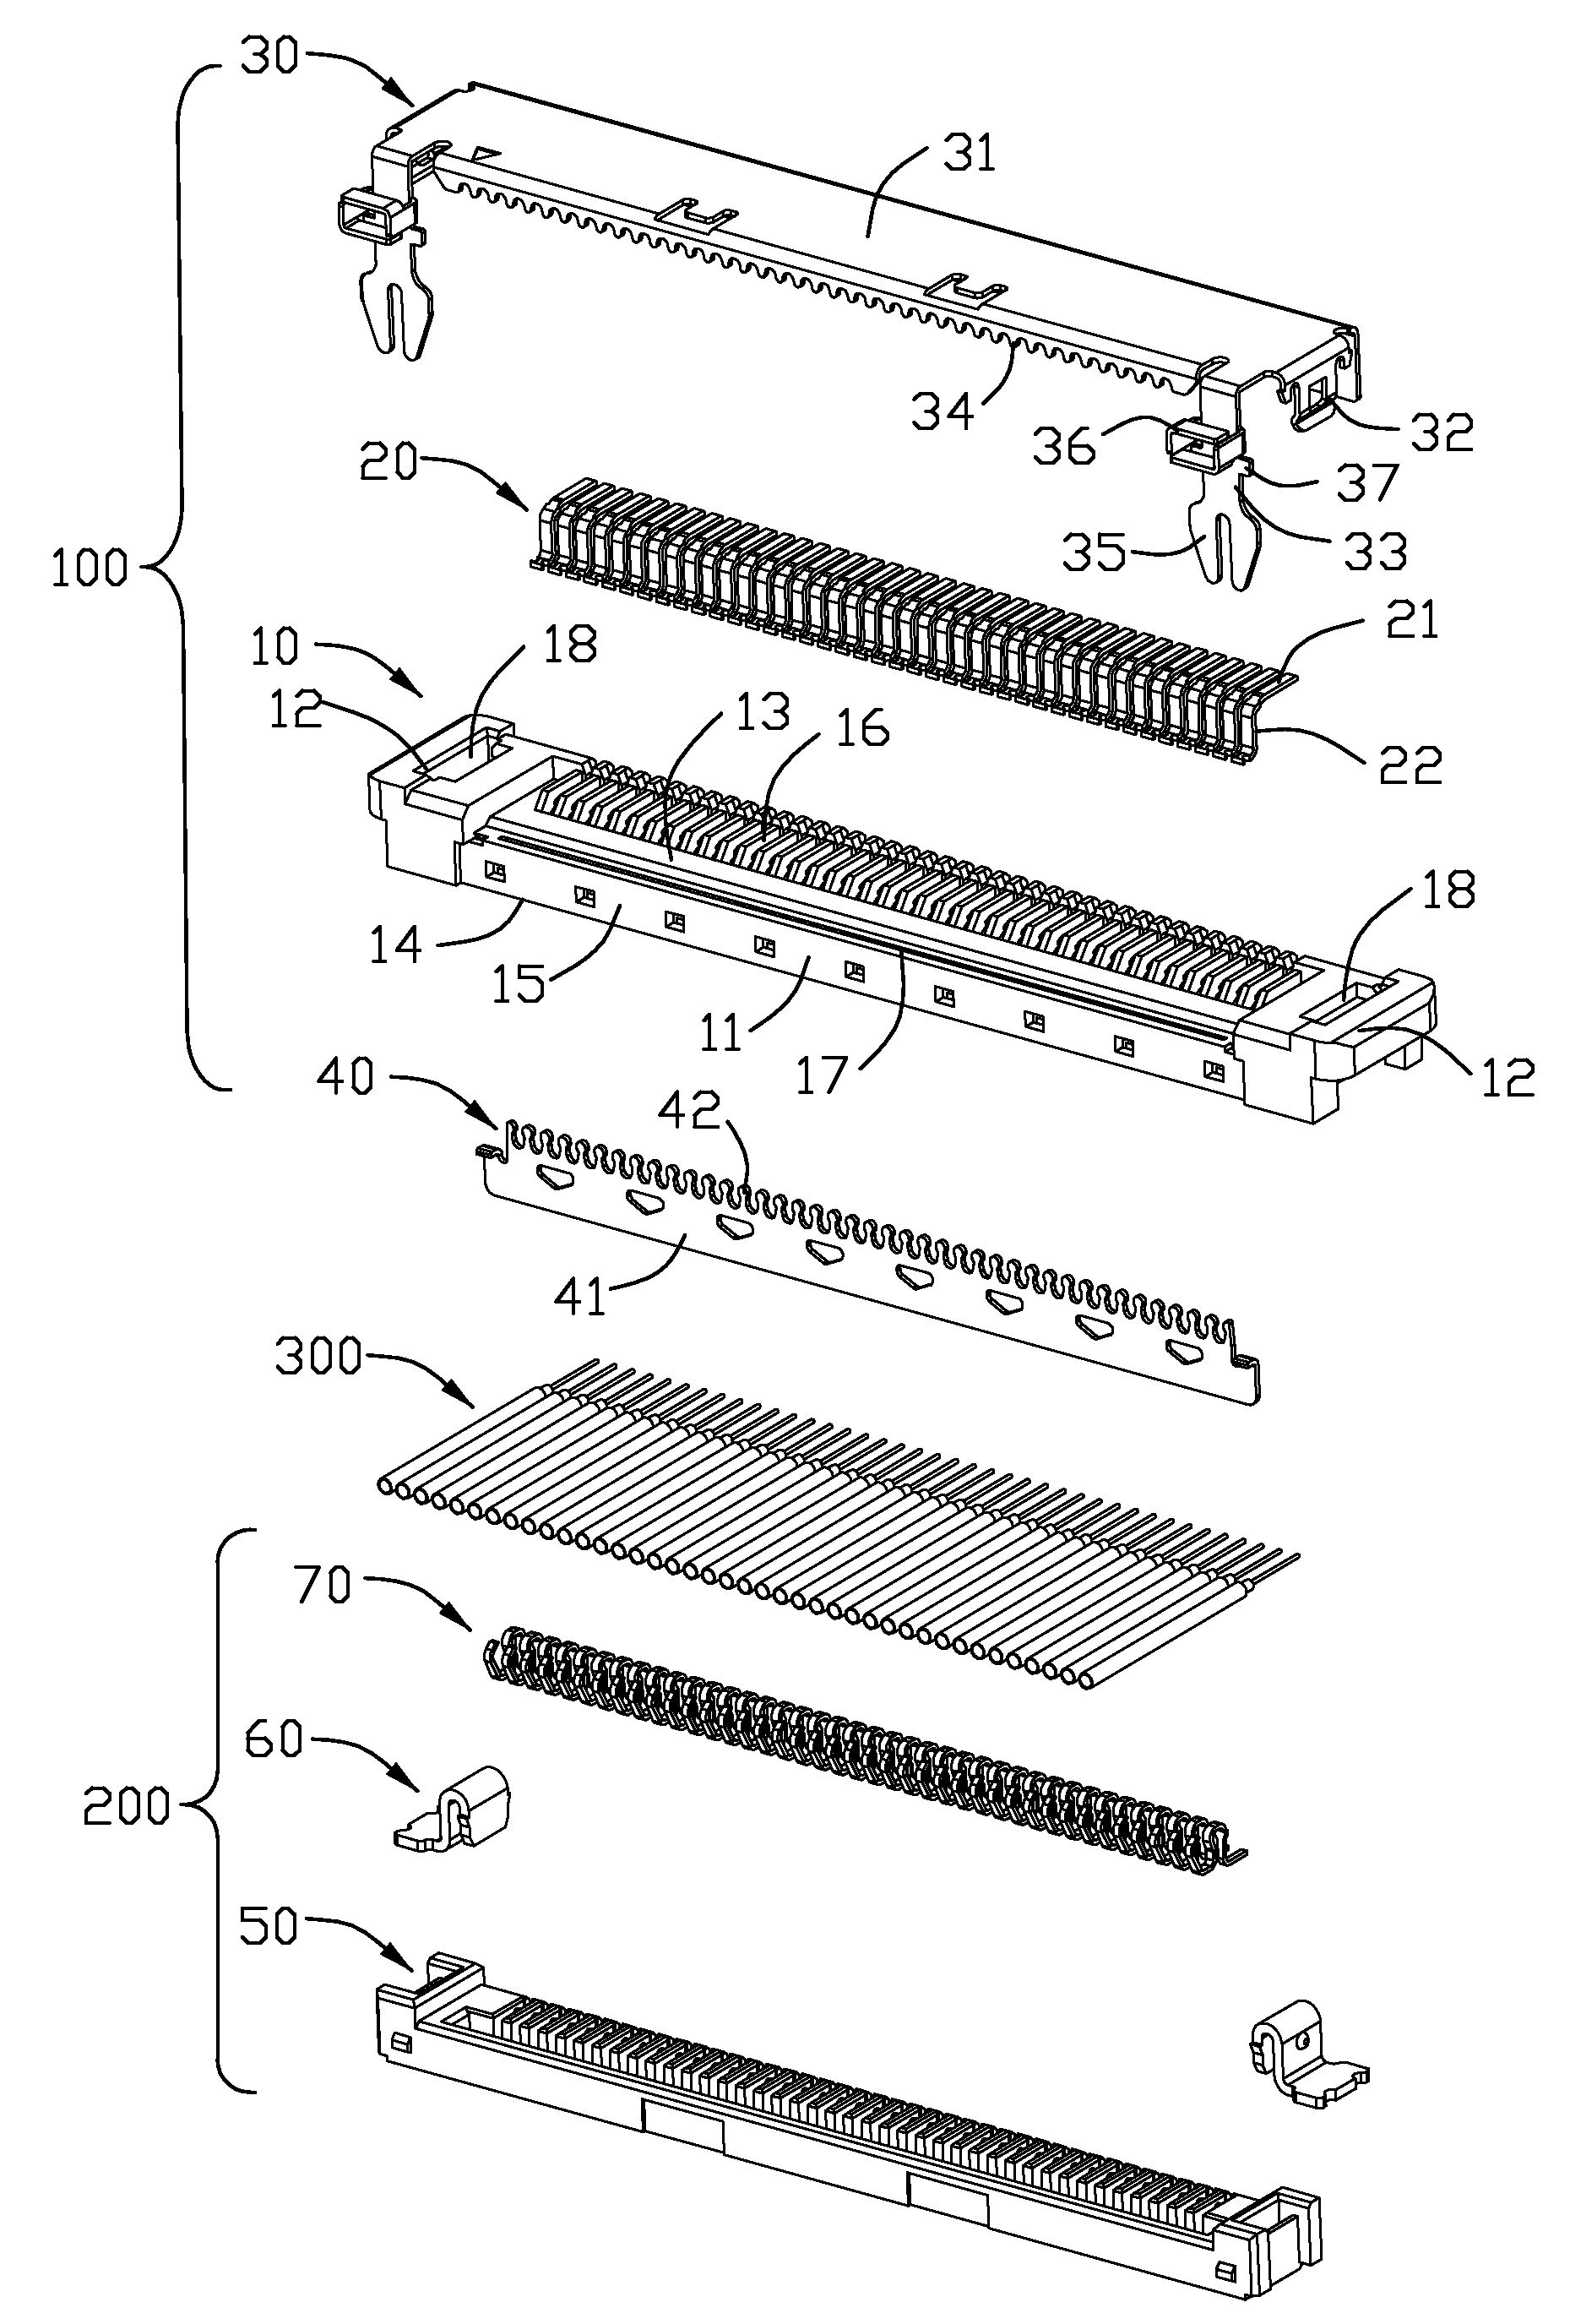 Cable assembly having hold-down arrangement